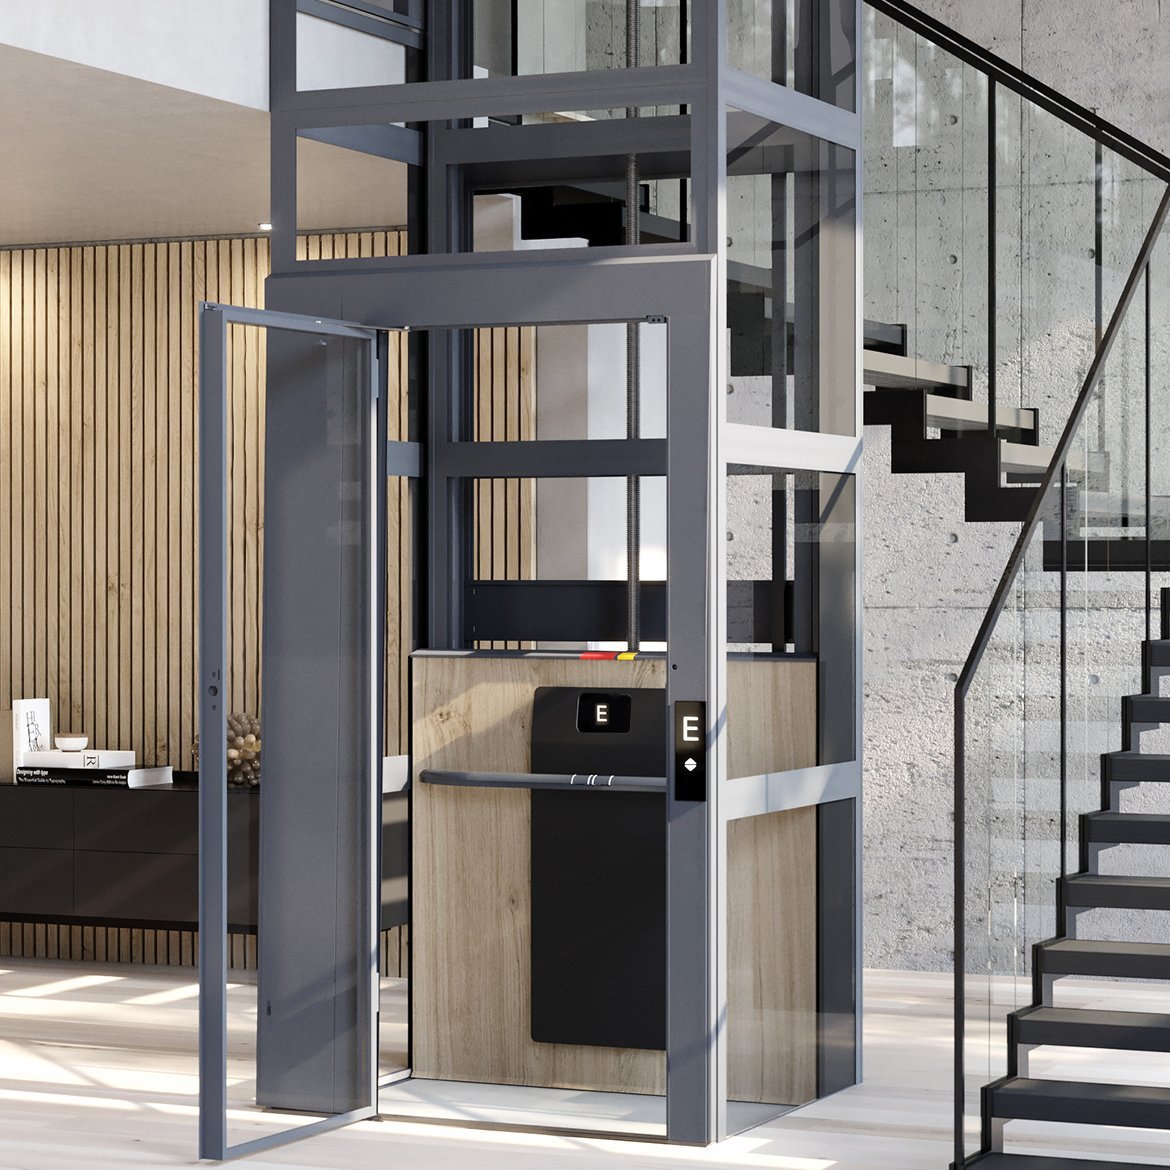 Cibes Lifts & Symmetry Elevators, Installed and Serviced by Mobility123 cover